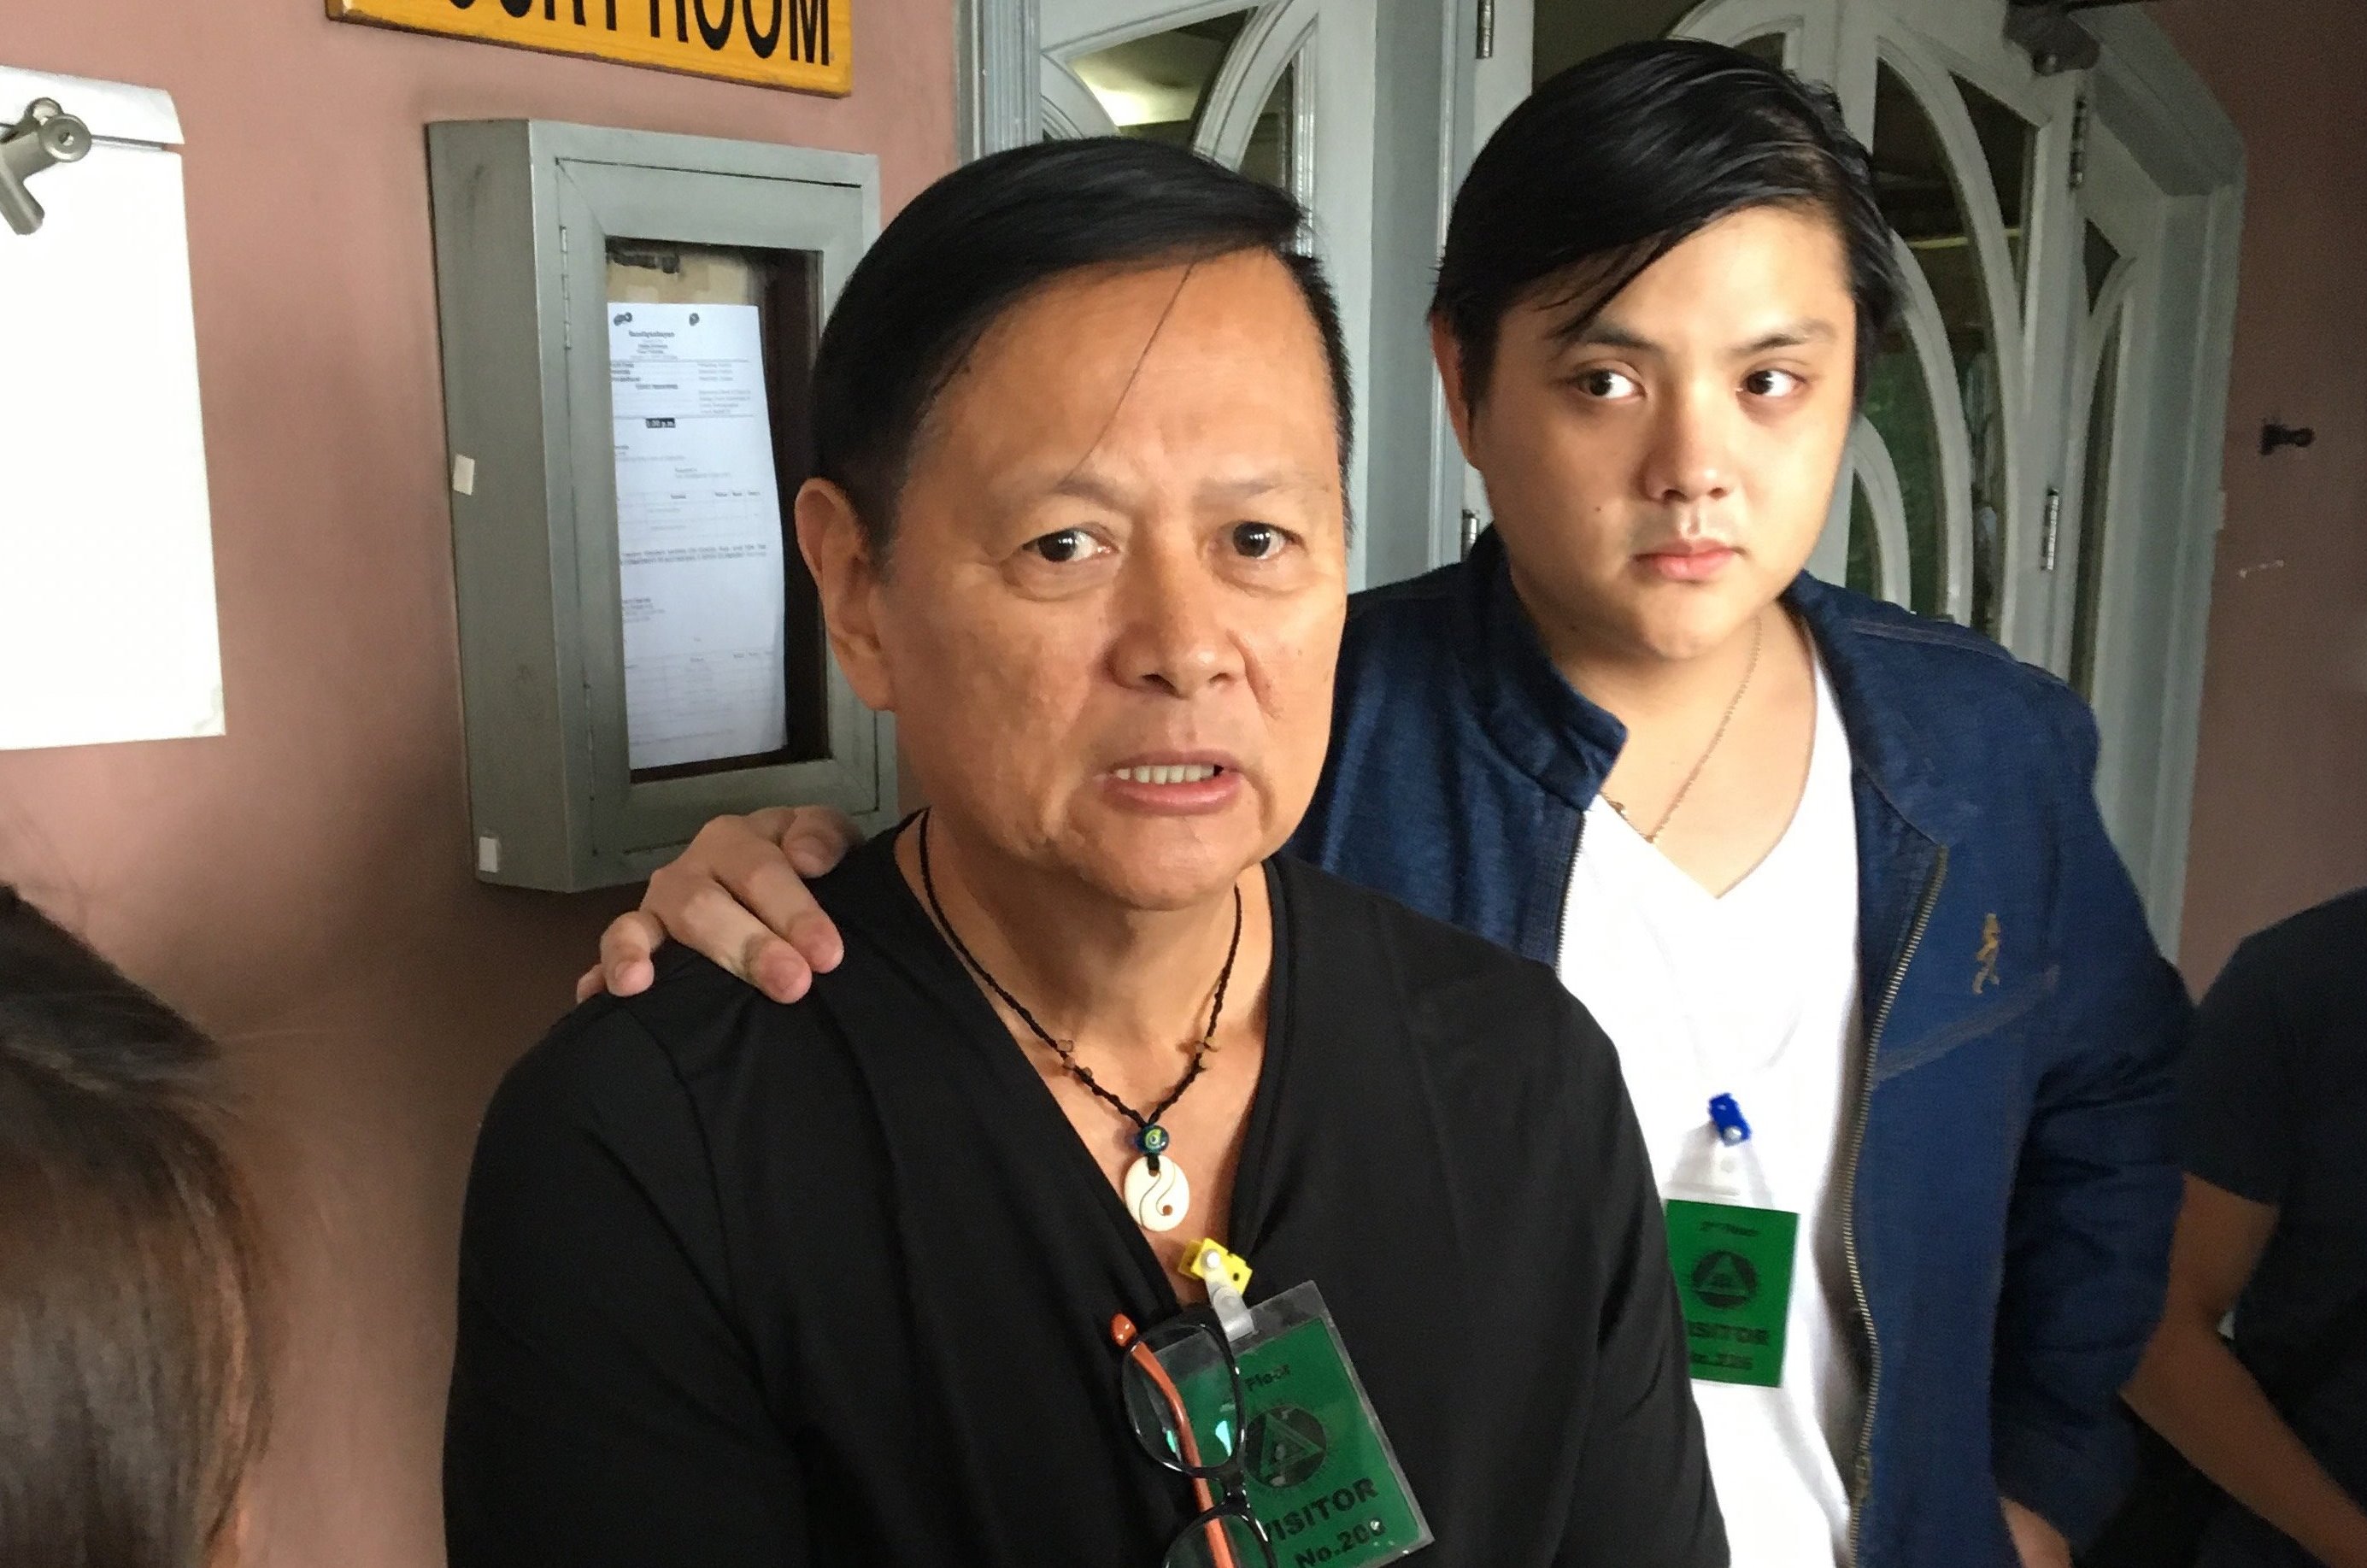 Former Palawan Governor Joel Reyes, joined by his son, attend the Sandiganbayan's hearing on the Ombudsman's motion to have him rearrested for being a flight risk. File Photo: Vince F. Nonato.